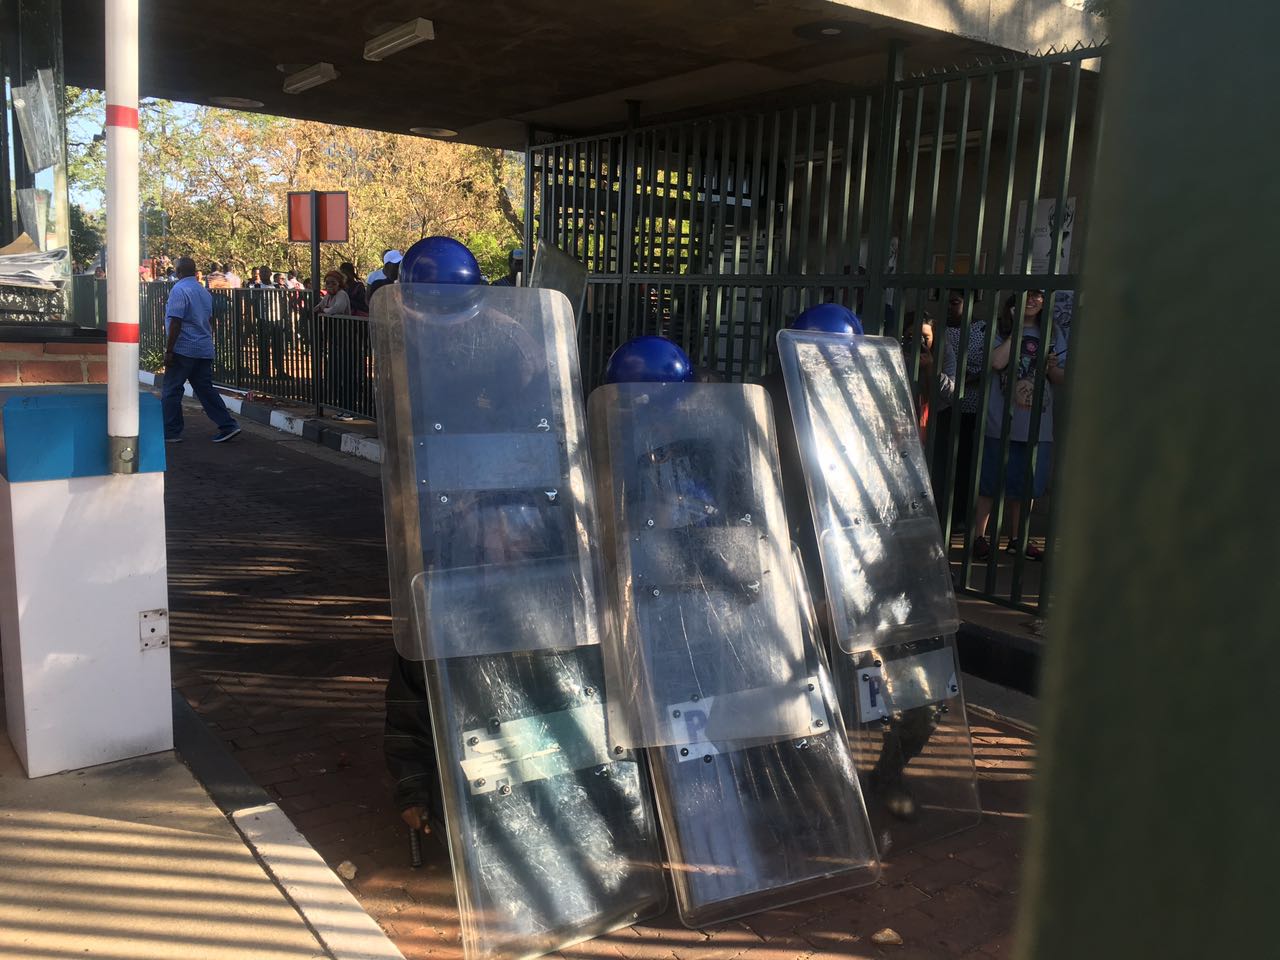 private-security-at-uj-protest-28-september-2016